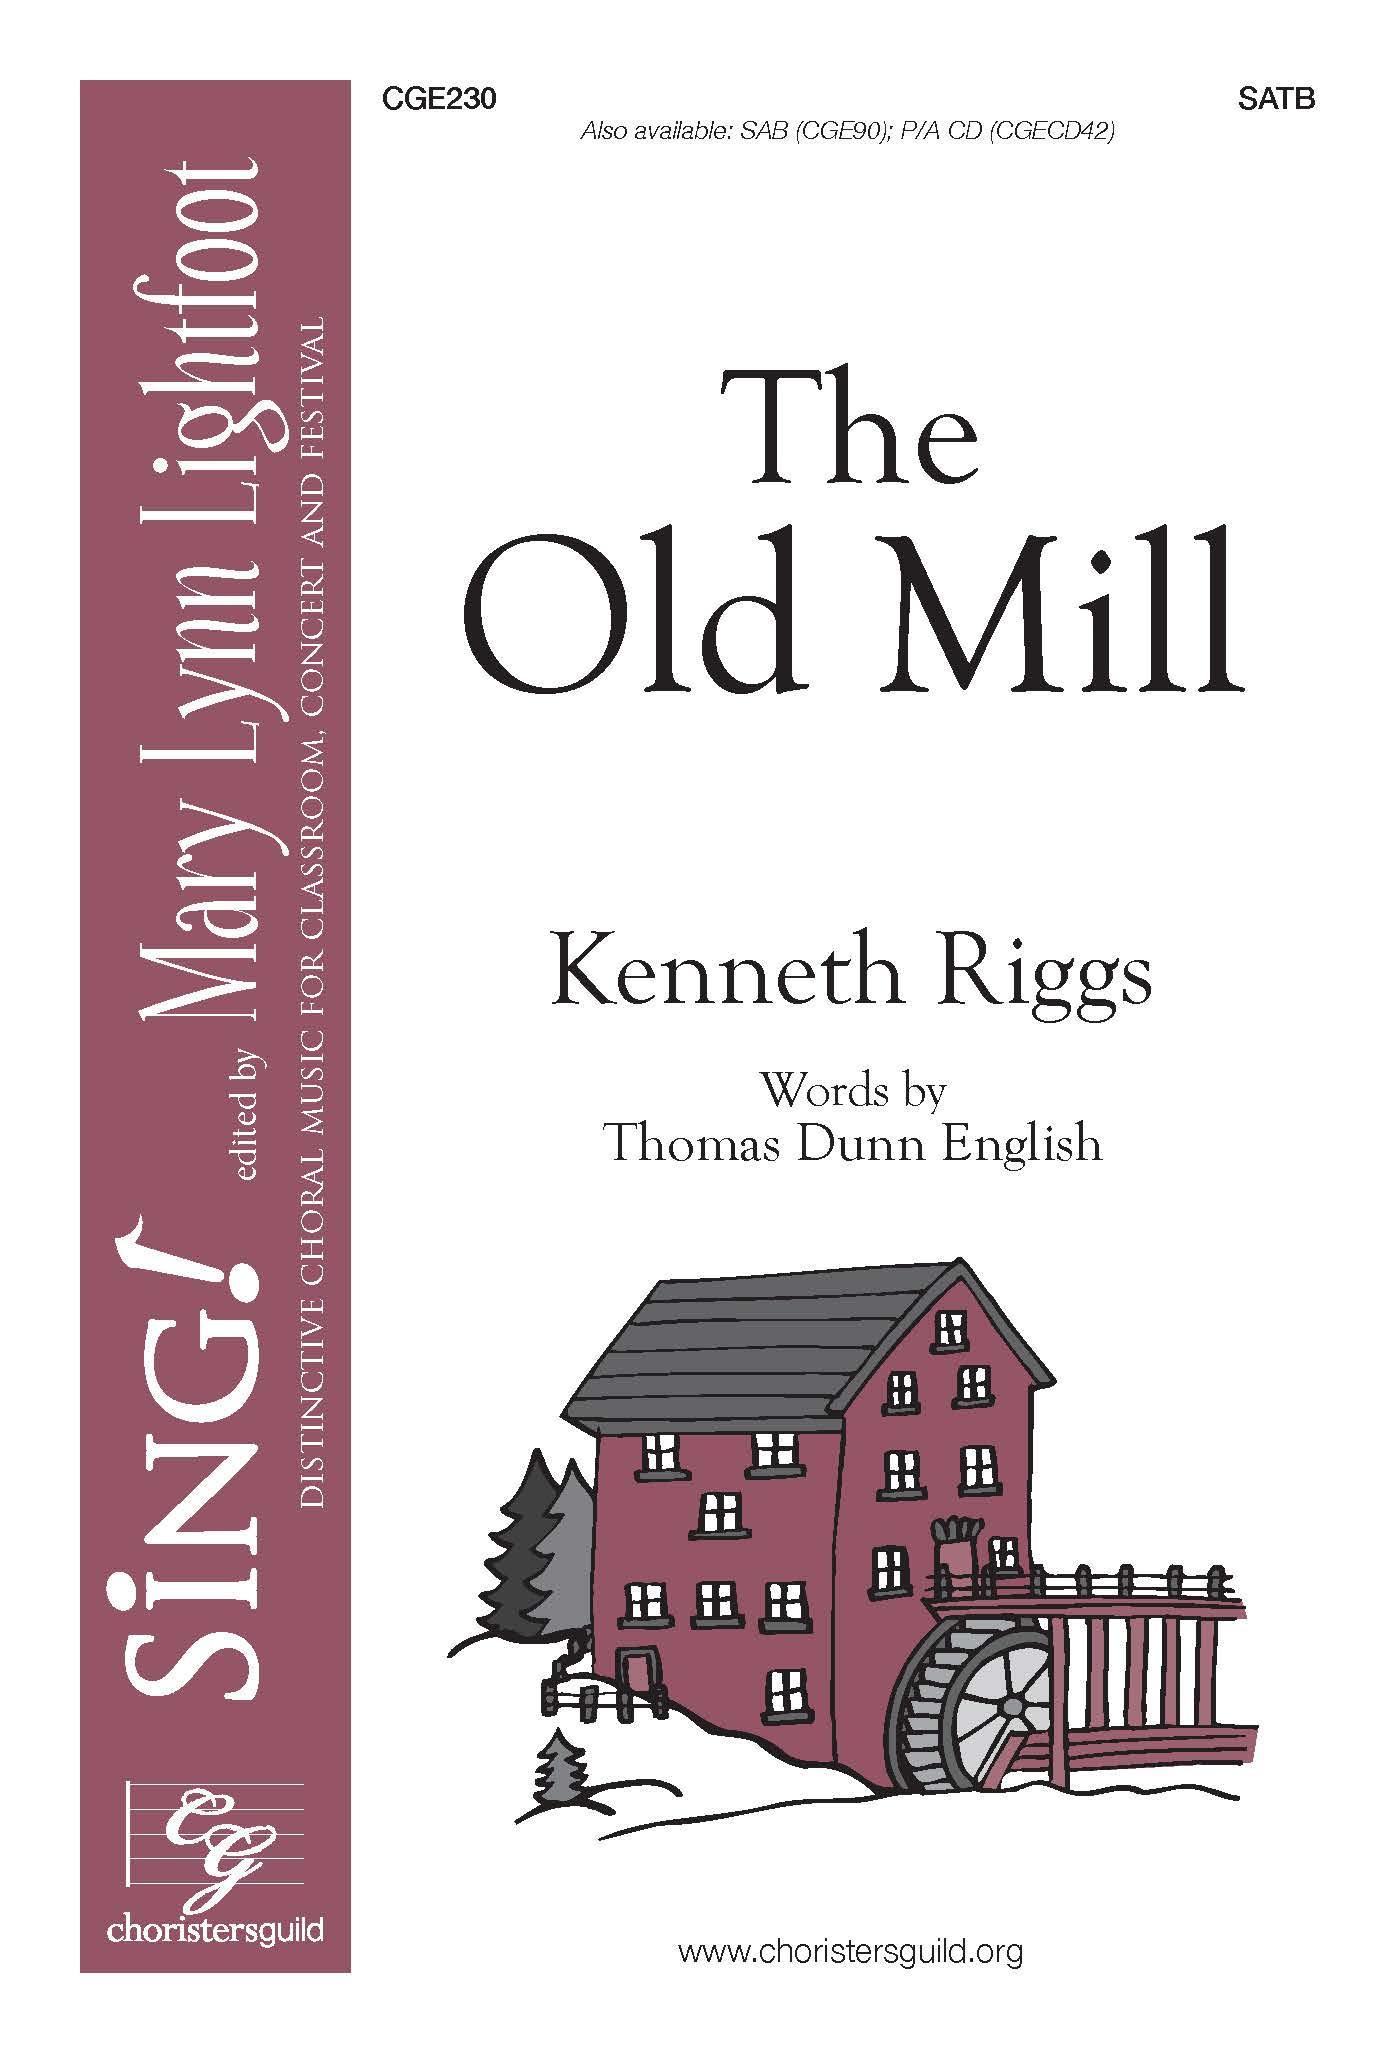 The Old Mill (SATB)